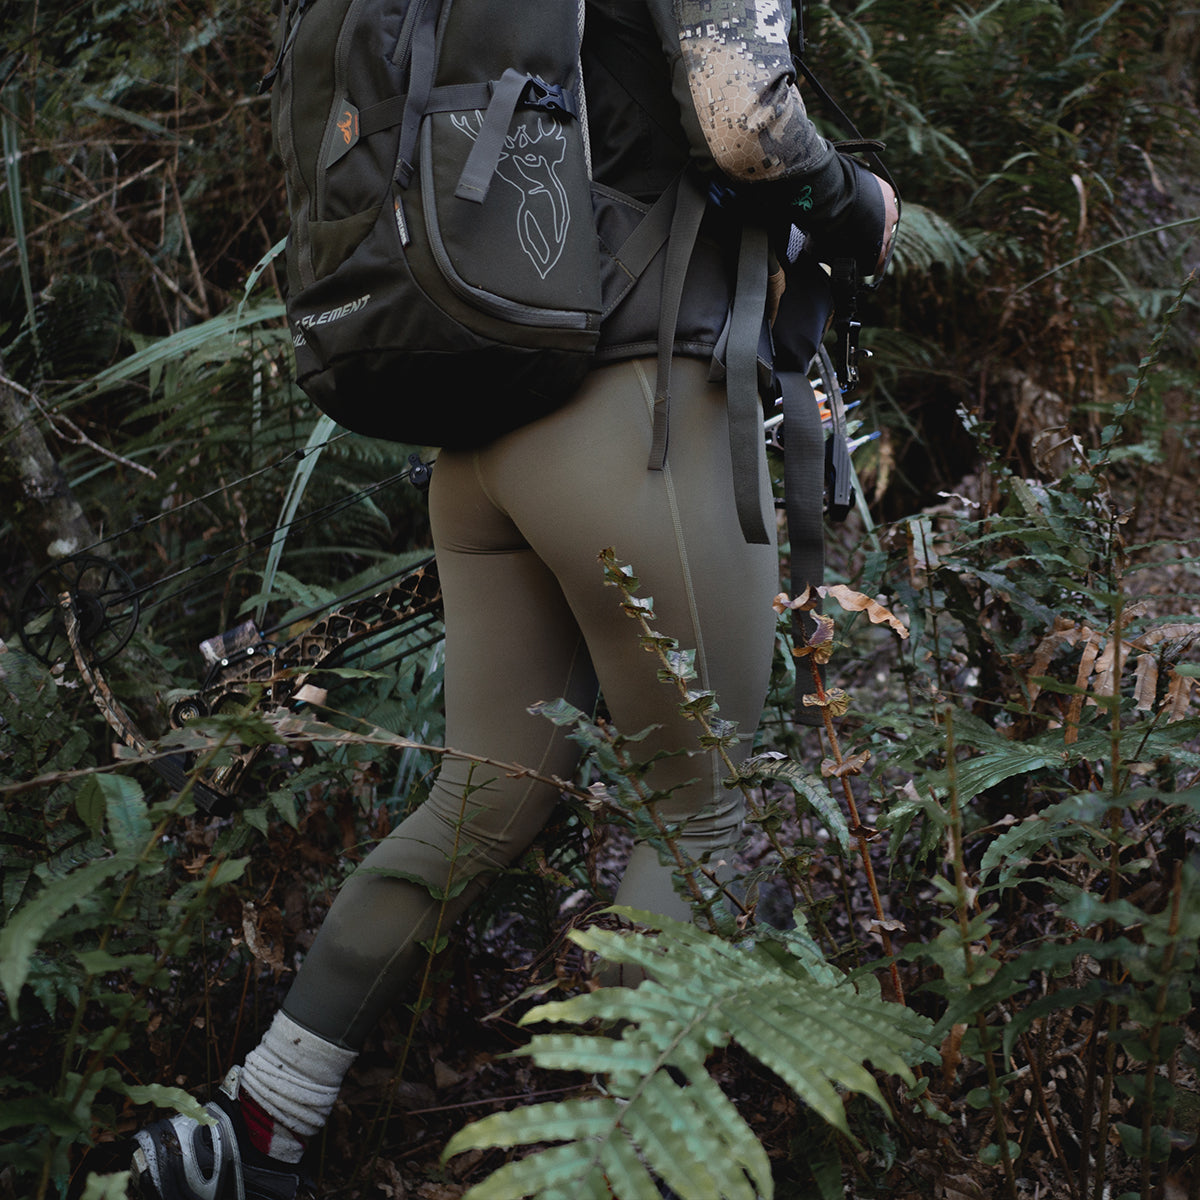 Hunters Element, Core+ Leggings, Thick And Extra Warm Base For Cold  Conditions, Hunting Leggings, Flat-Lock Seams